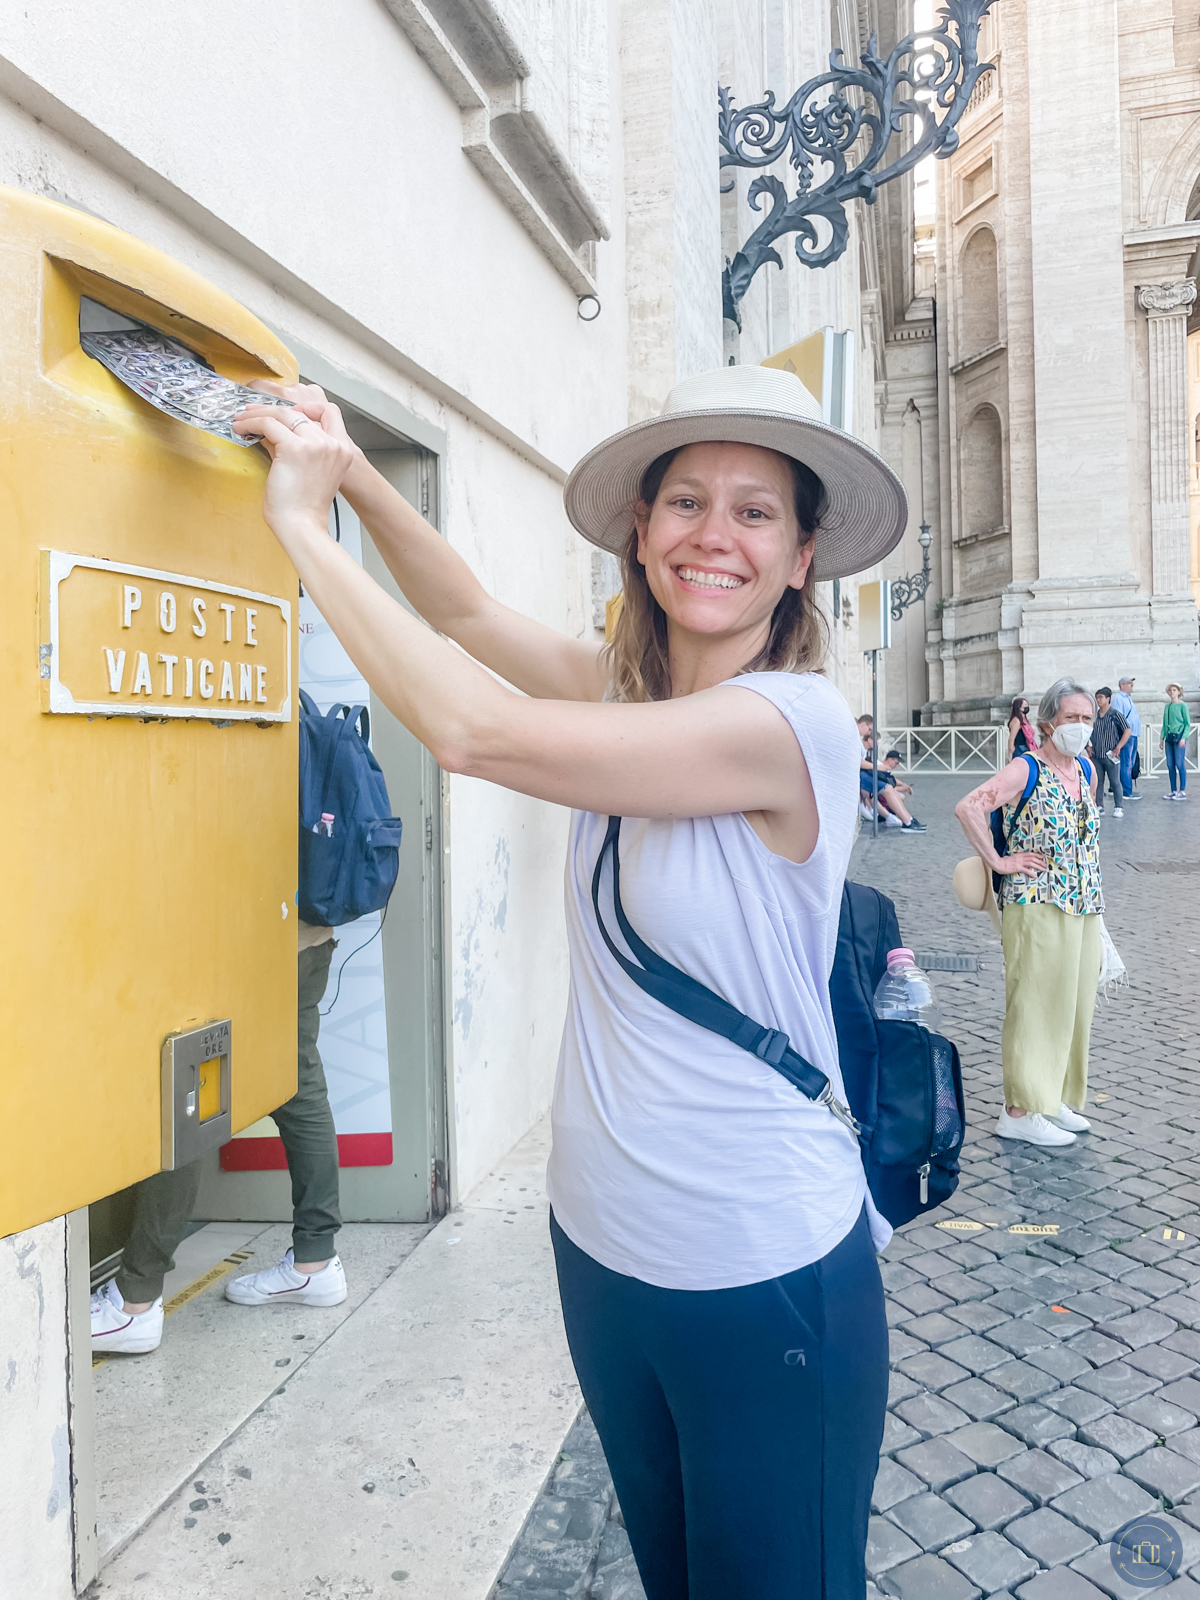 mailing a postcard from the vatican in rome